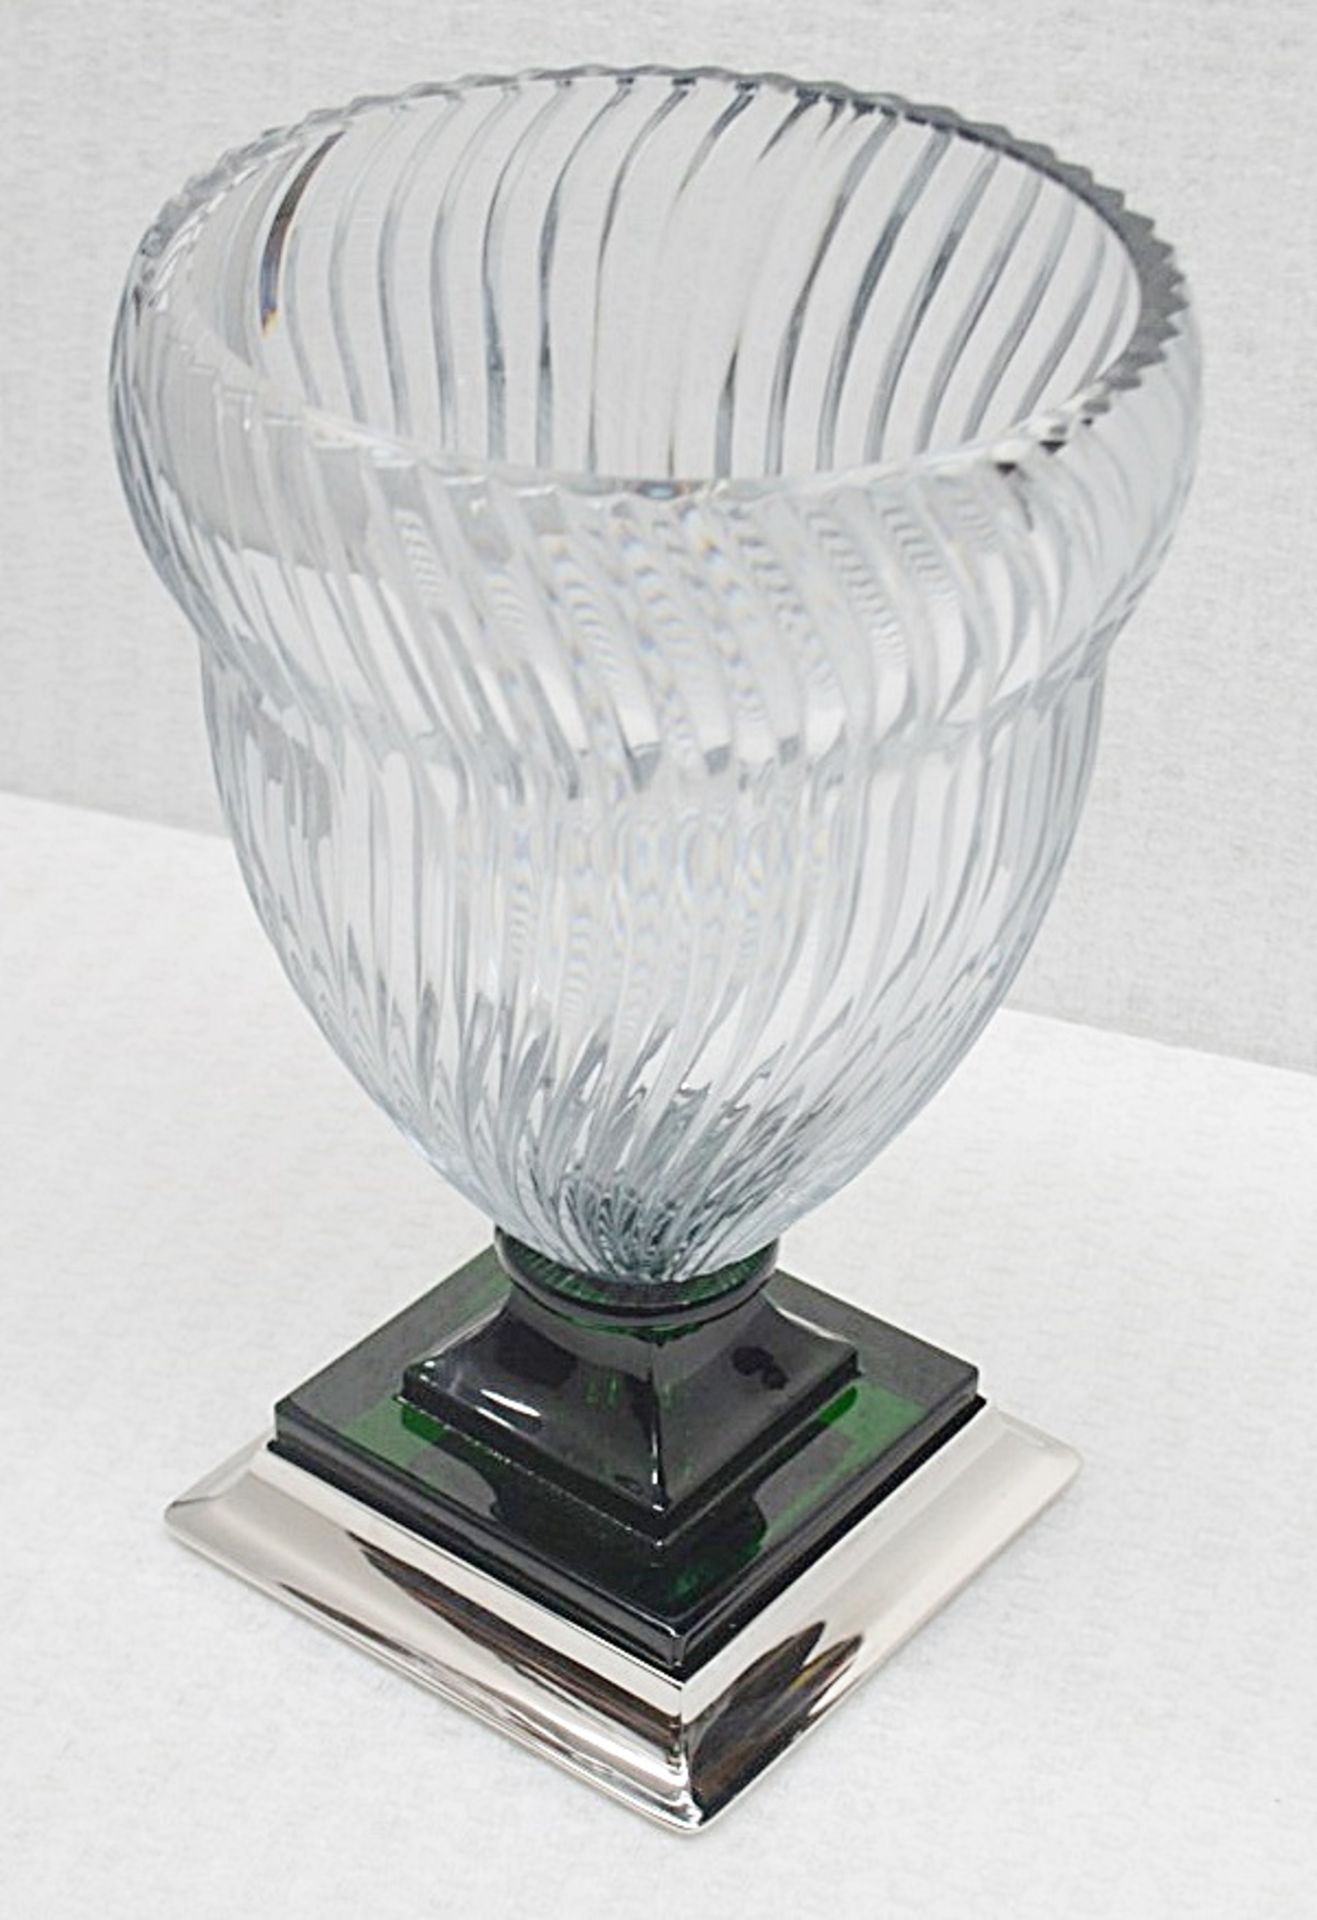 1 x BALDI 'Home Jewels' Italian Hand-crafted Artisan GHIAHDA VASE In A Green & Clear Crystal With - Image 3 of 4